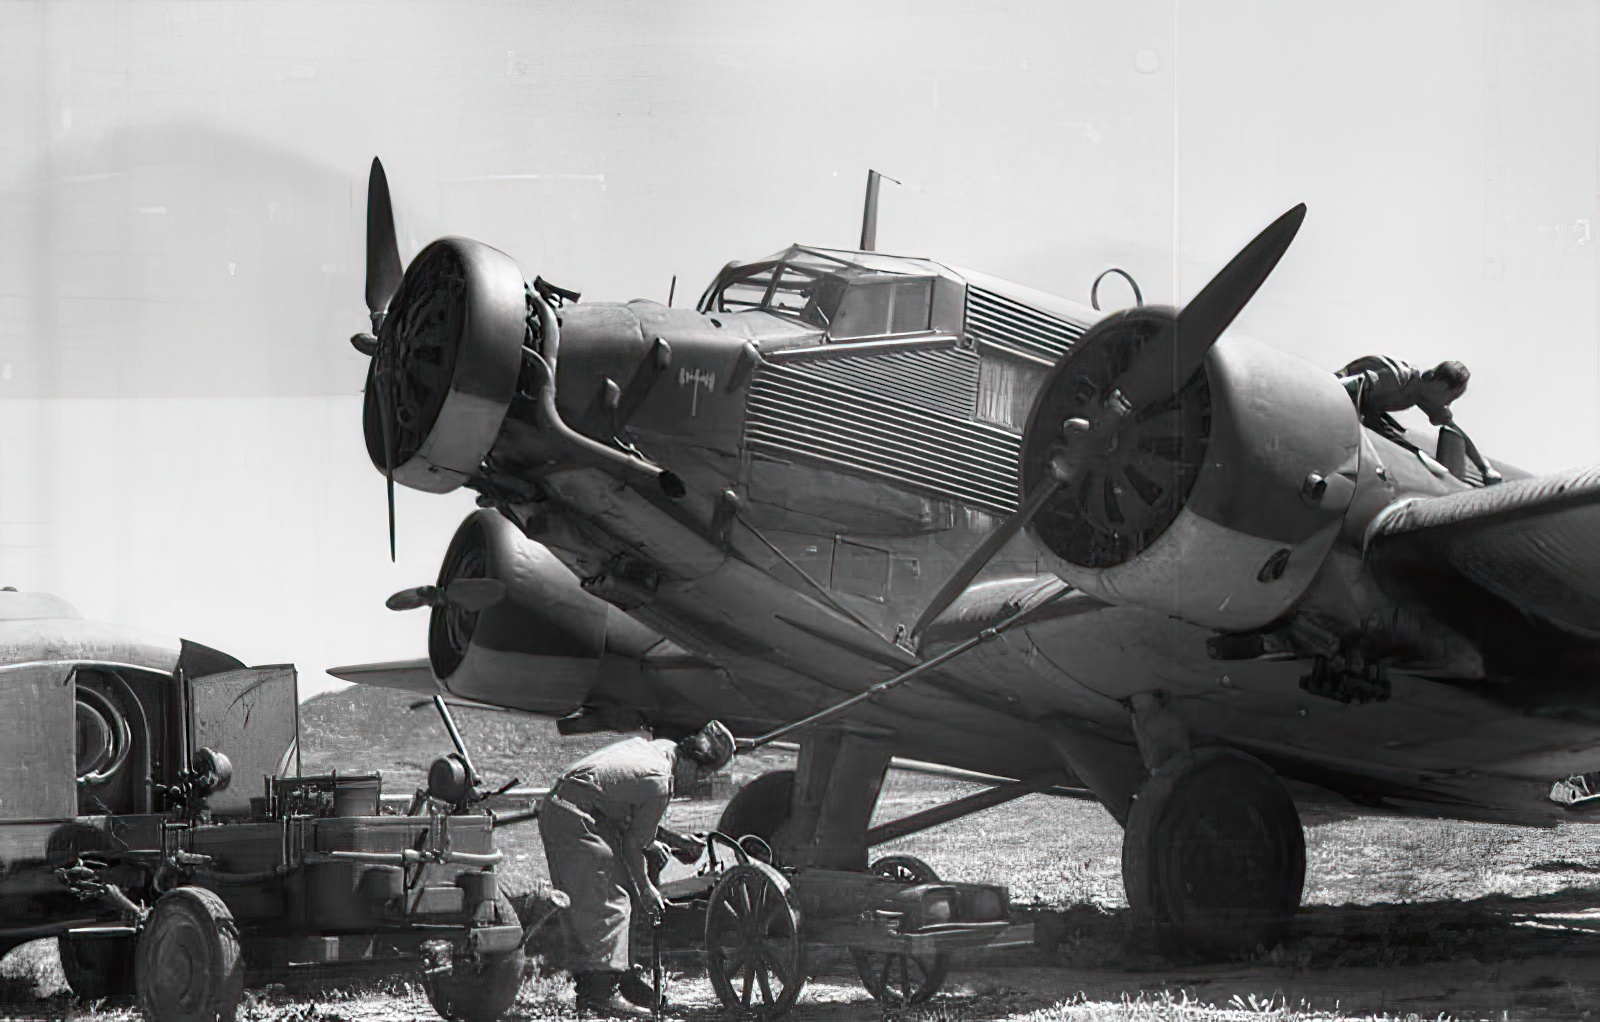 A Luftwaffe Ju 52 being serviced in Crete in 1943: Note the narrow-chord Townend ring on the central engine and the deeper-chord NACA cowlings on the wing engines